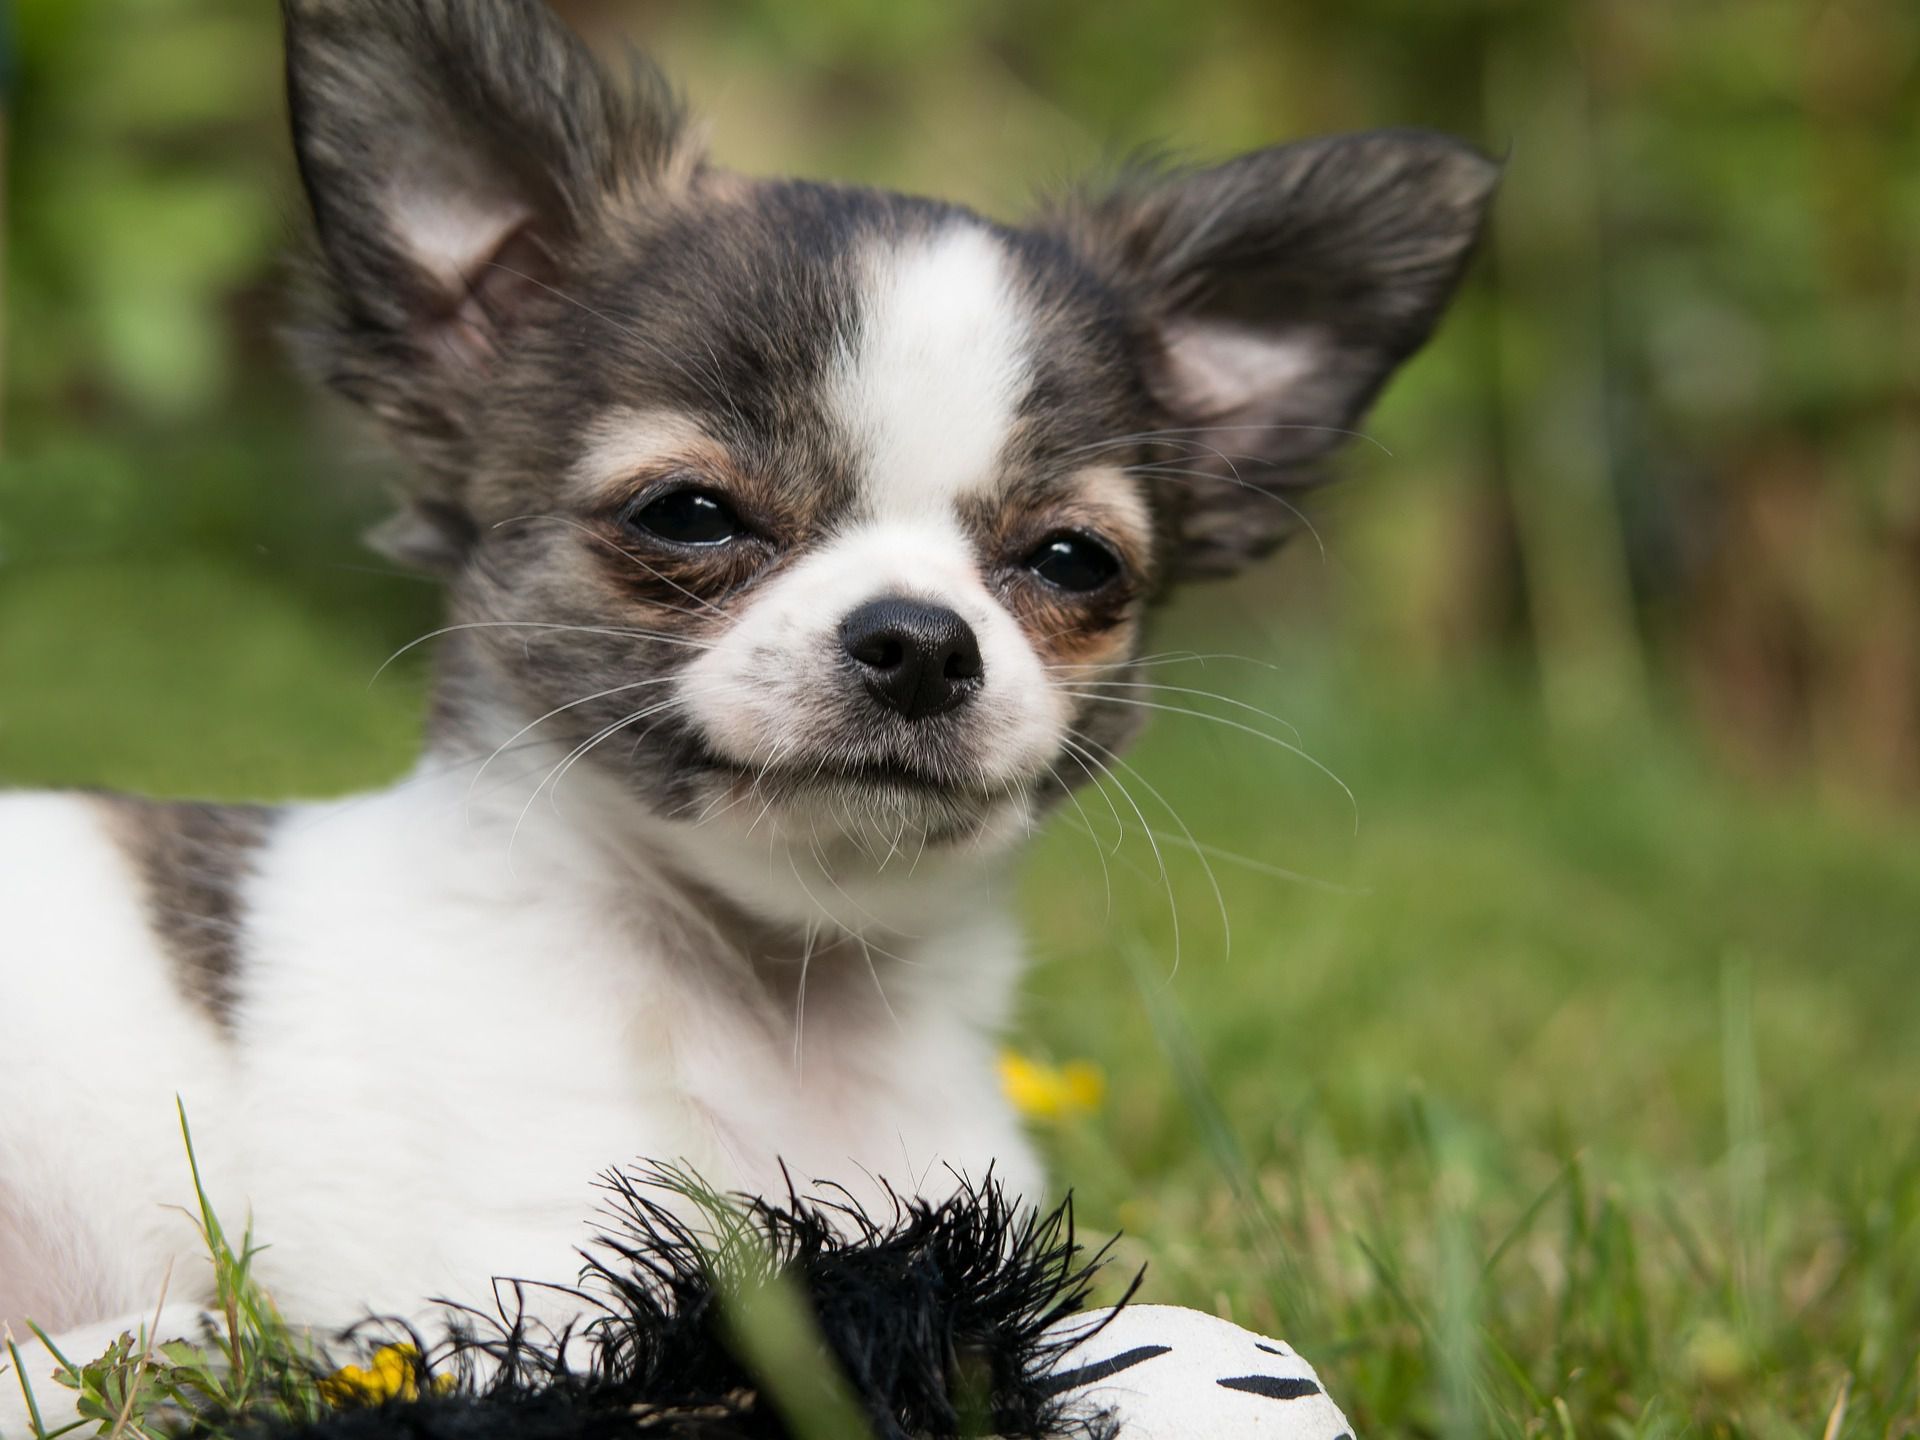 What You Need to Know About Teacup Dogs